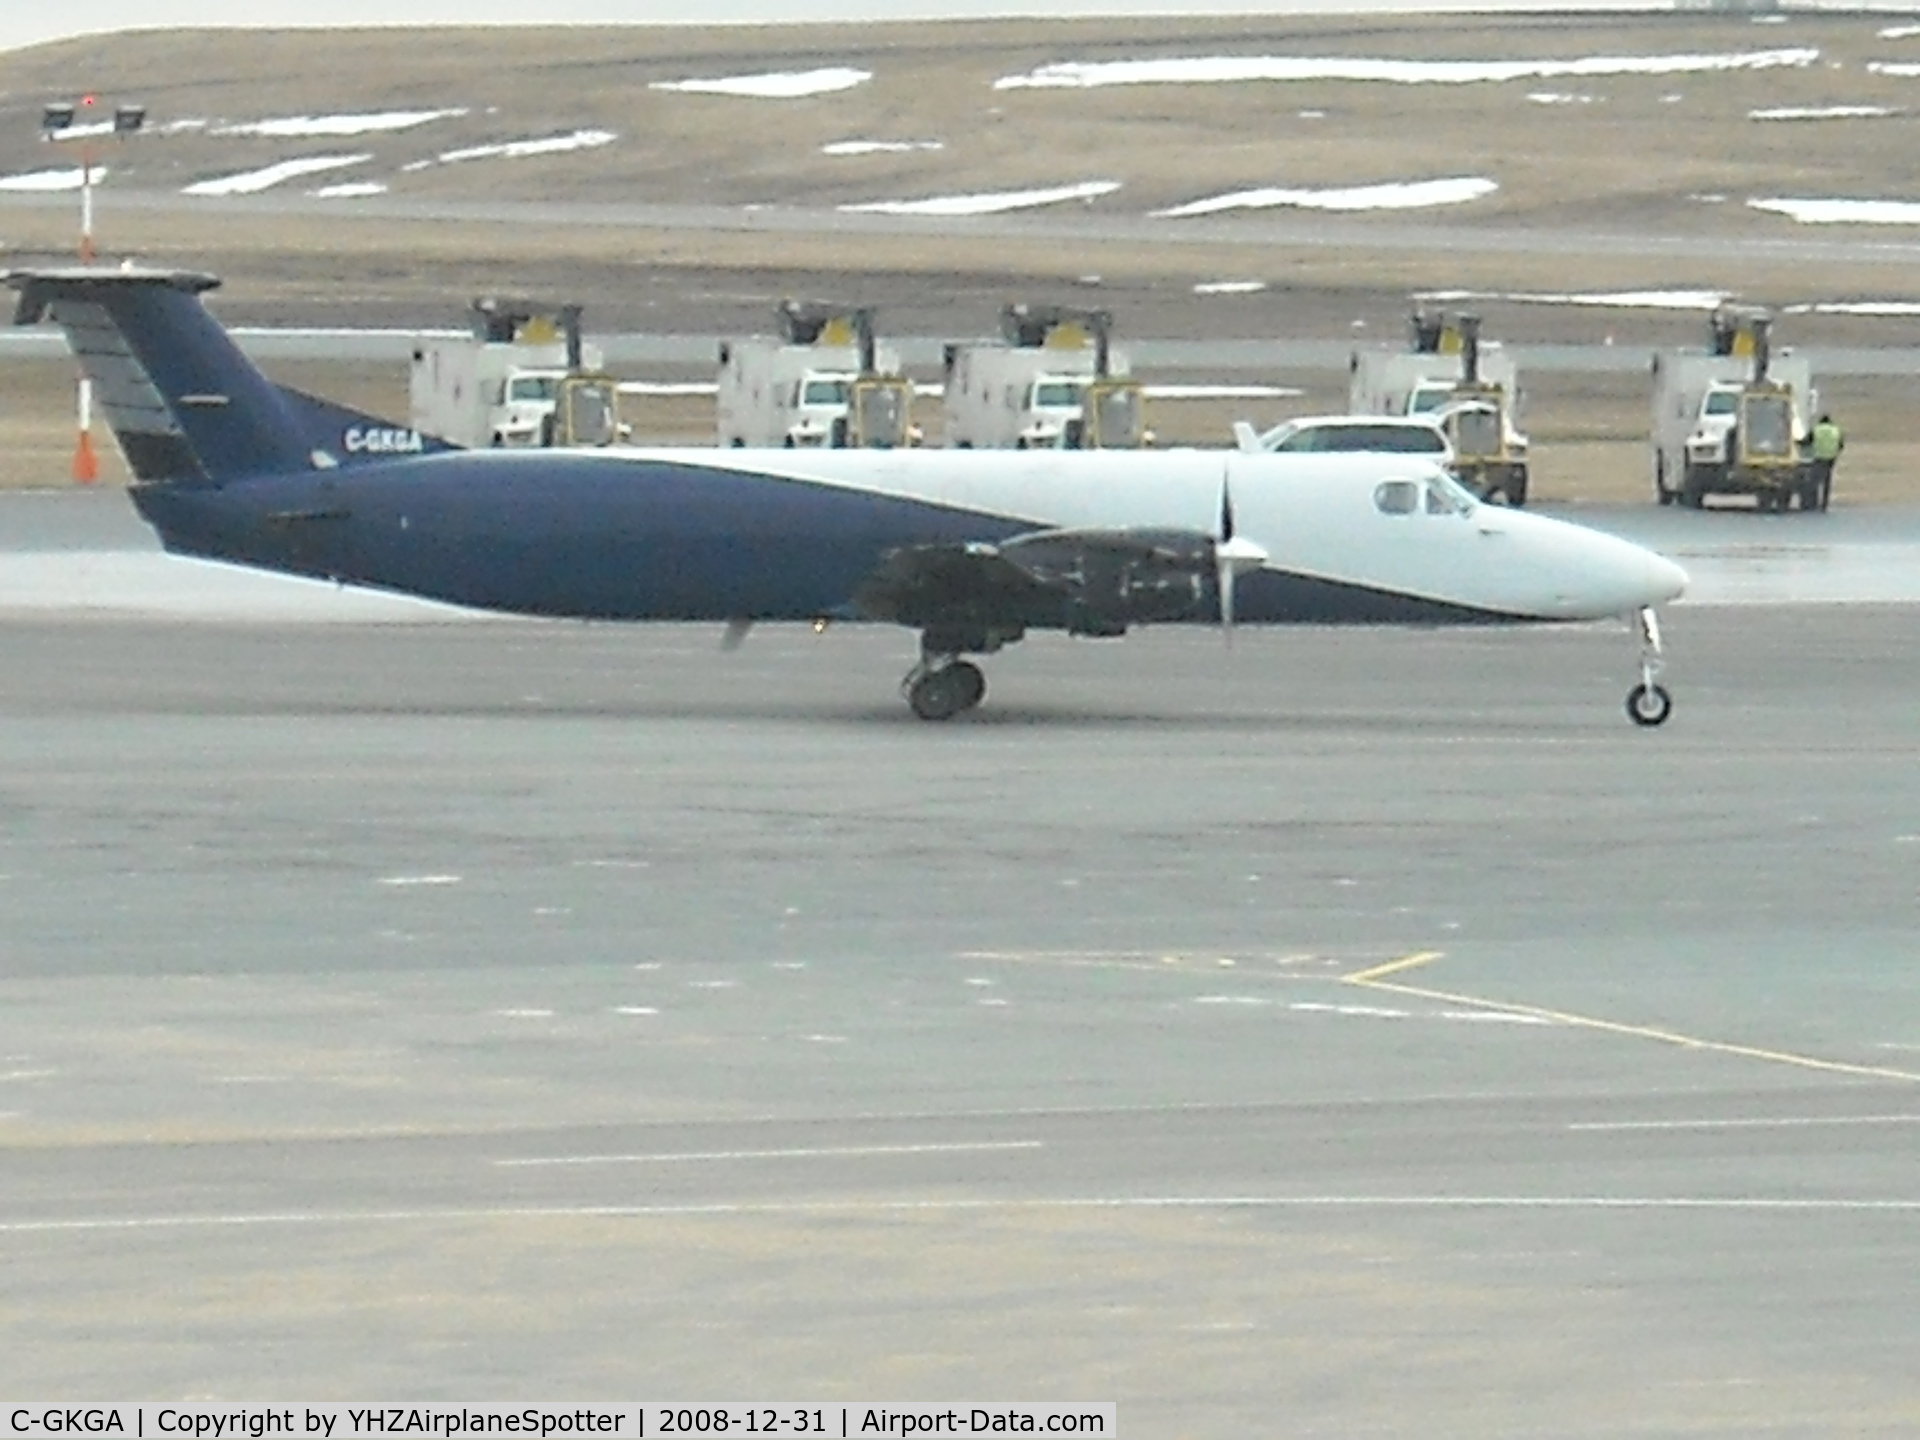 C-GKGA, 1990 Beech 1900C-1 C/N UC-117, This aircraft was spotted at YHZ shortly after landing